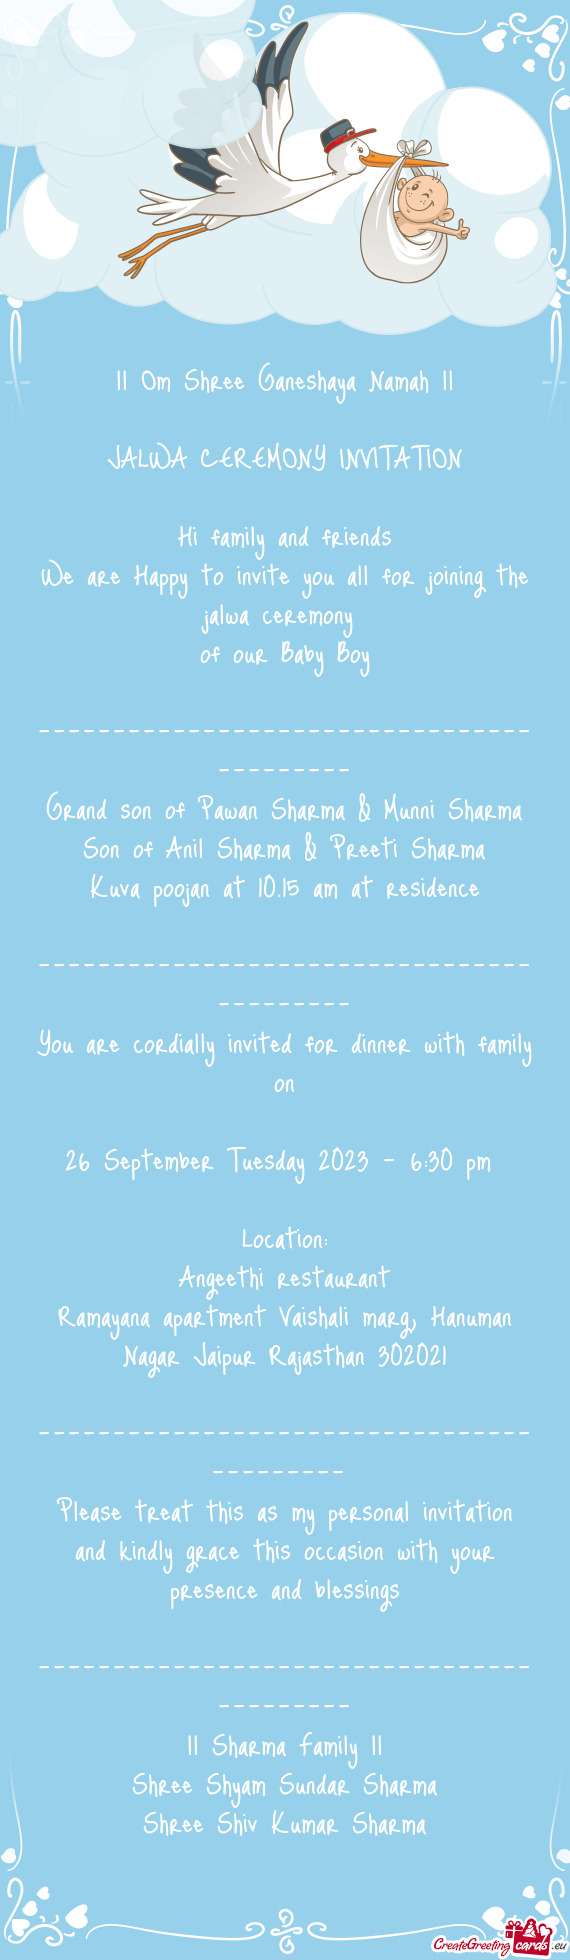 You are cordially invited for dinner with family on